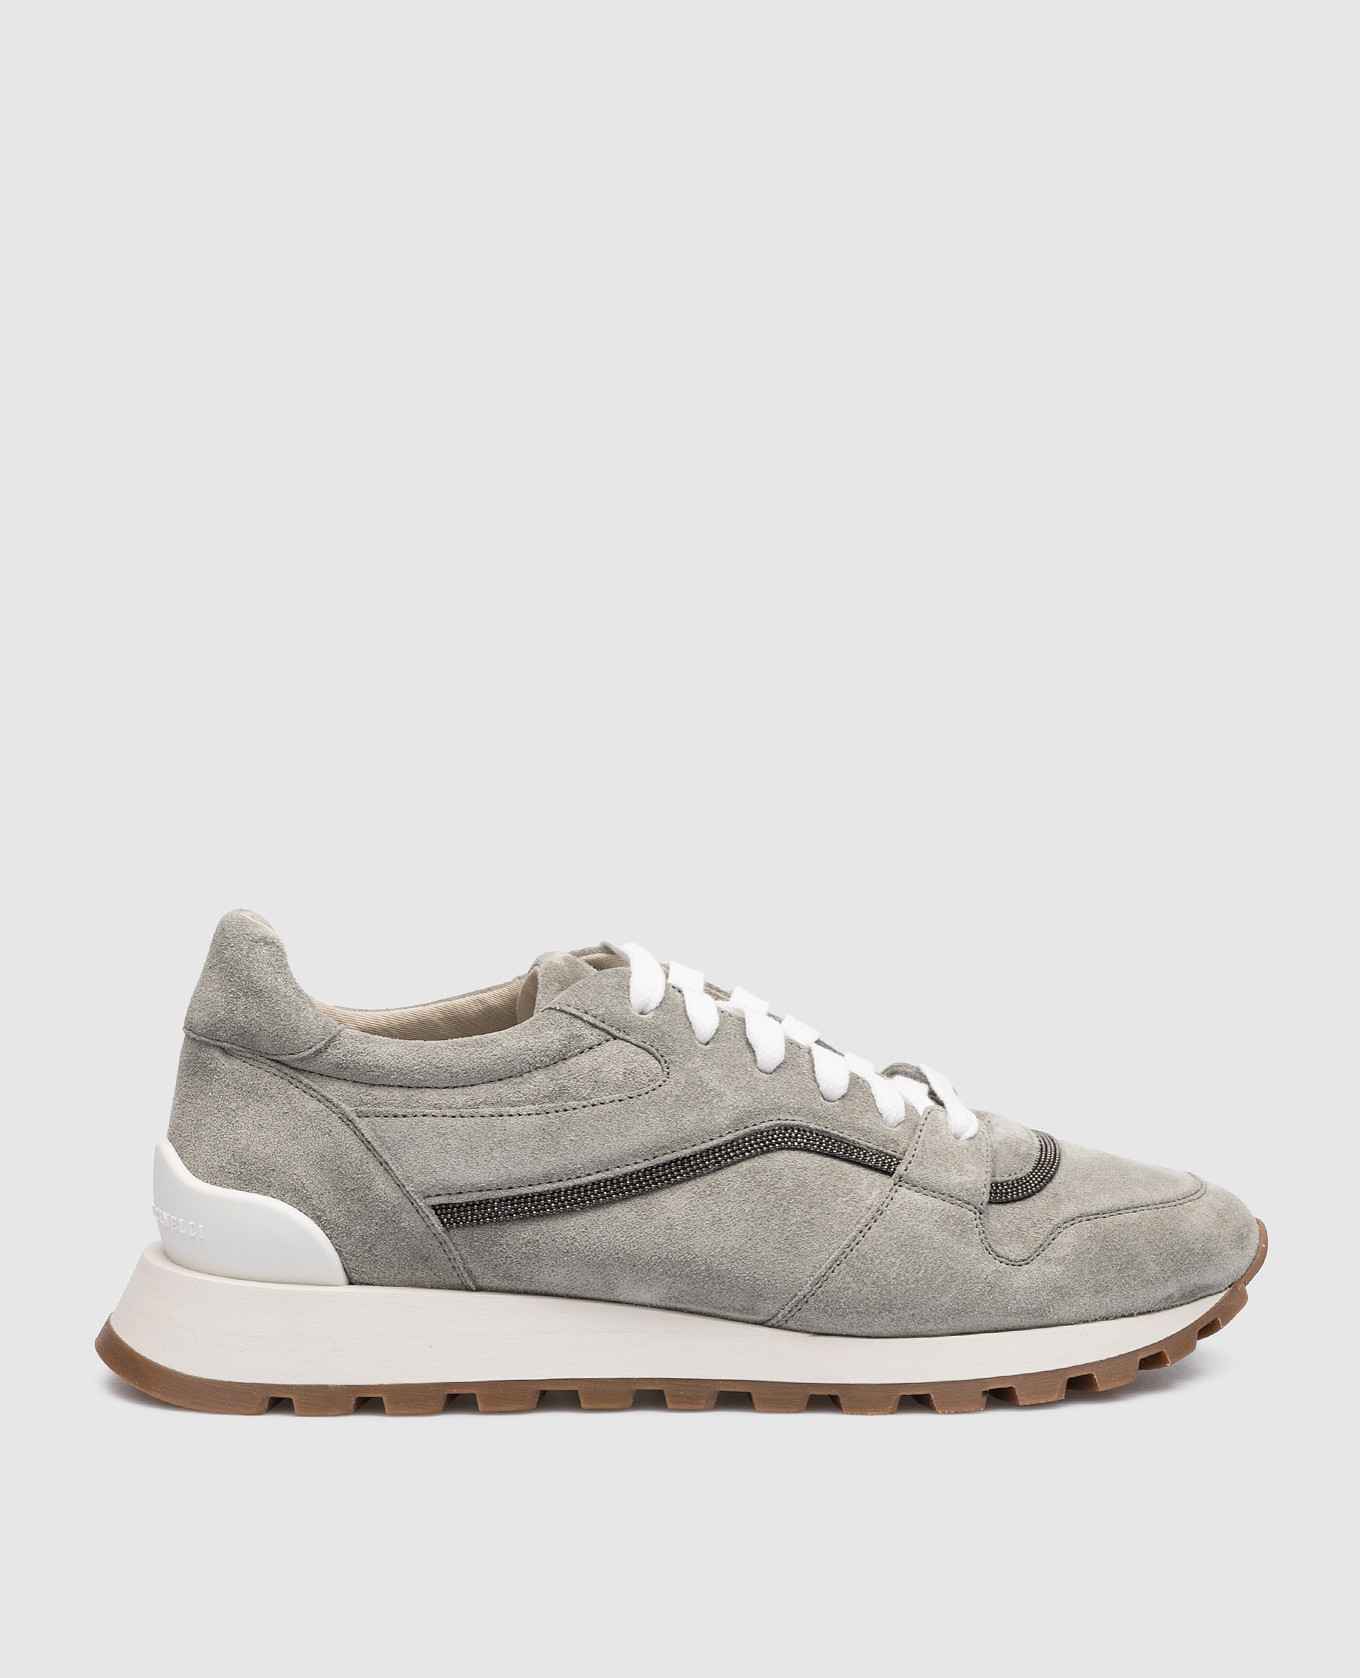 Gray suede sneakers with monil chain